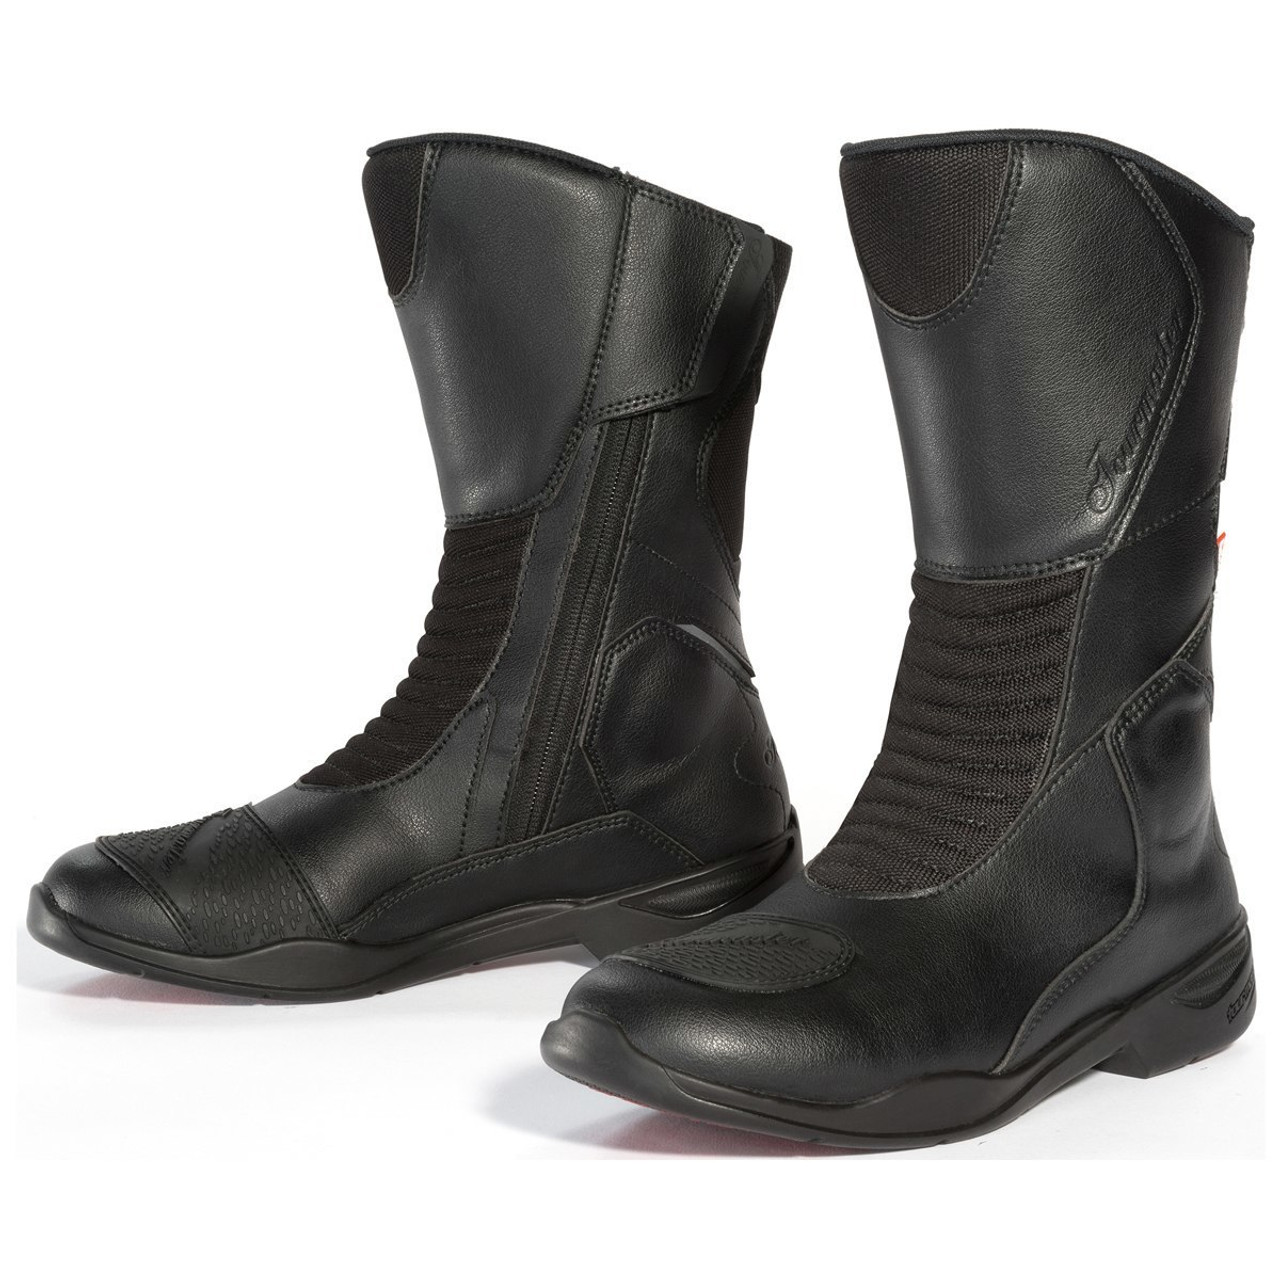 Tour Master Women's Trinity Touring Motorcycle Boots - Team Motorcycle